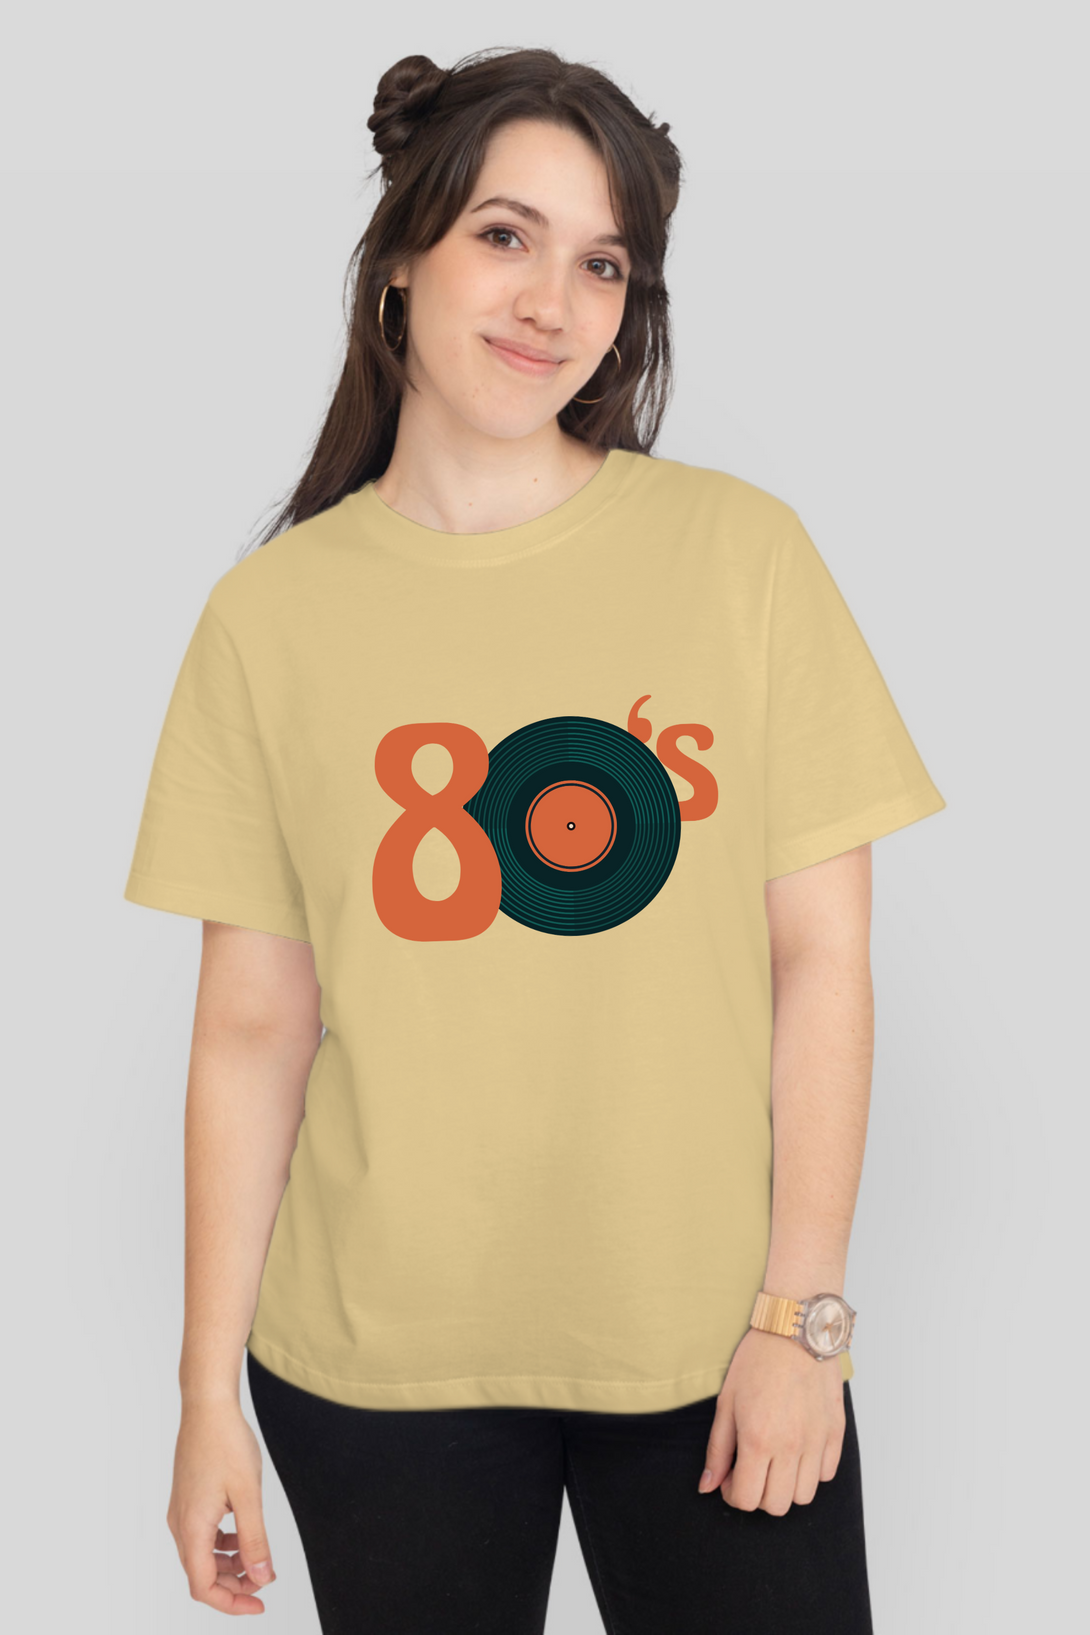 Retro Groove Printed T-Shirt For Women - WowWaves - 8